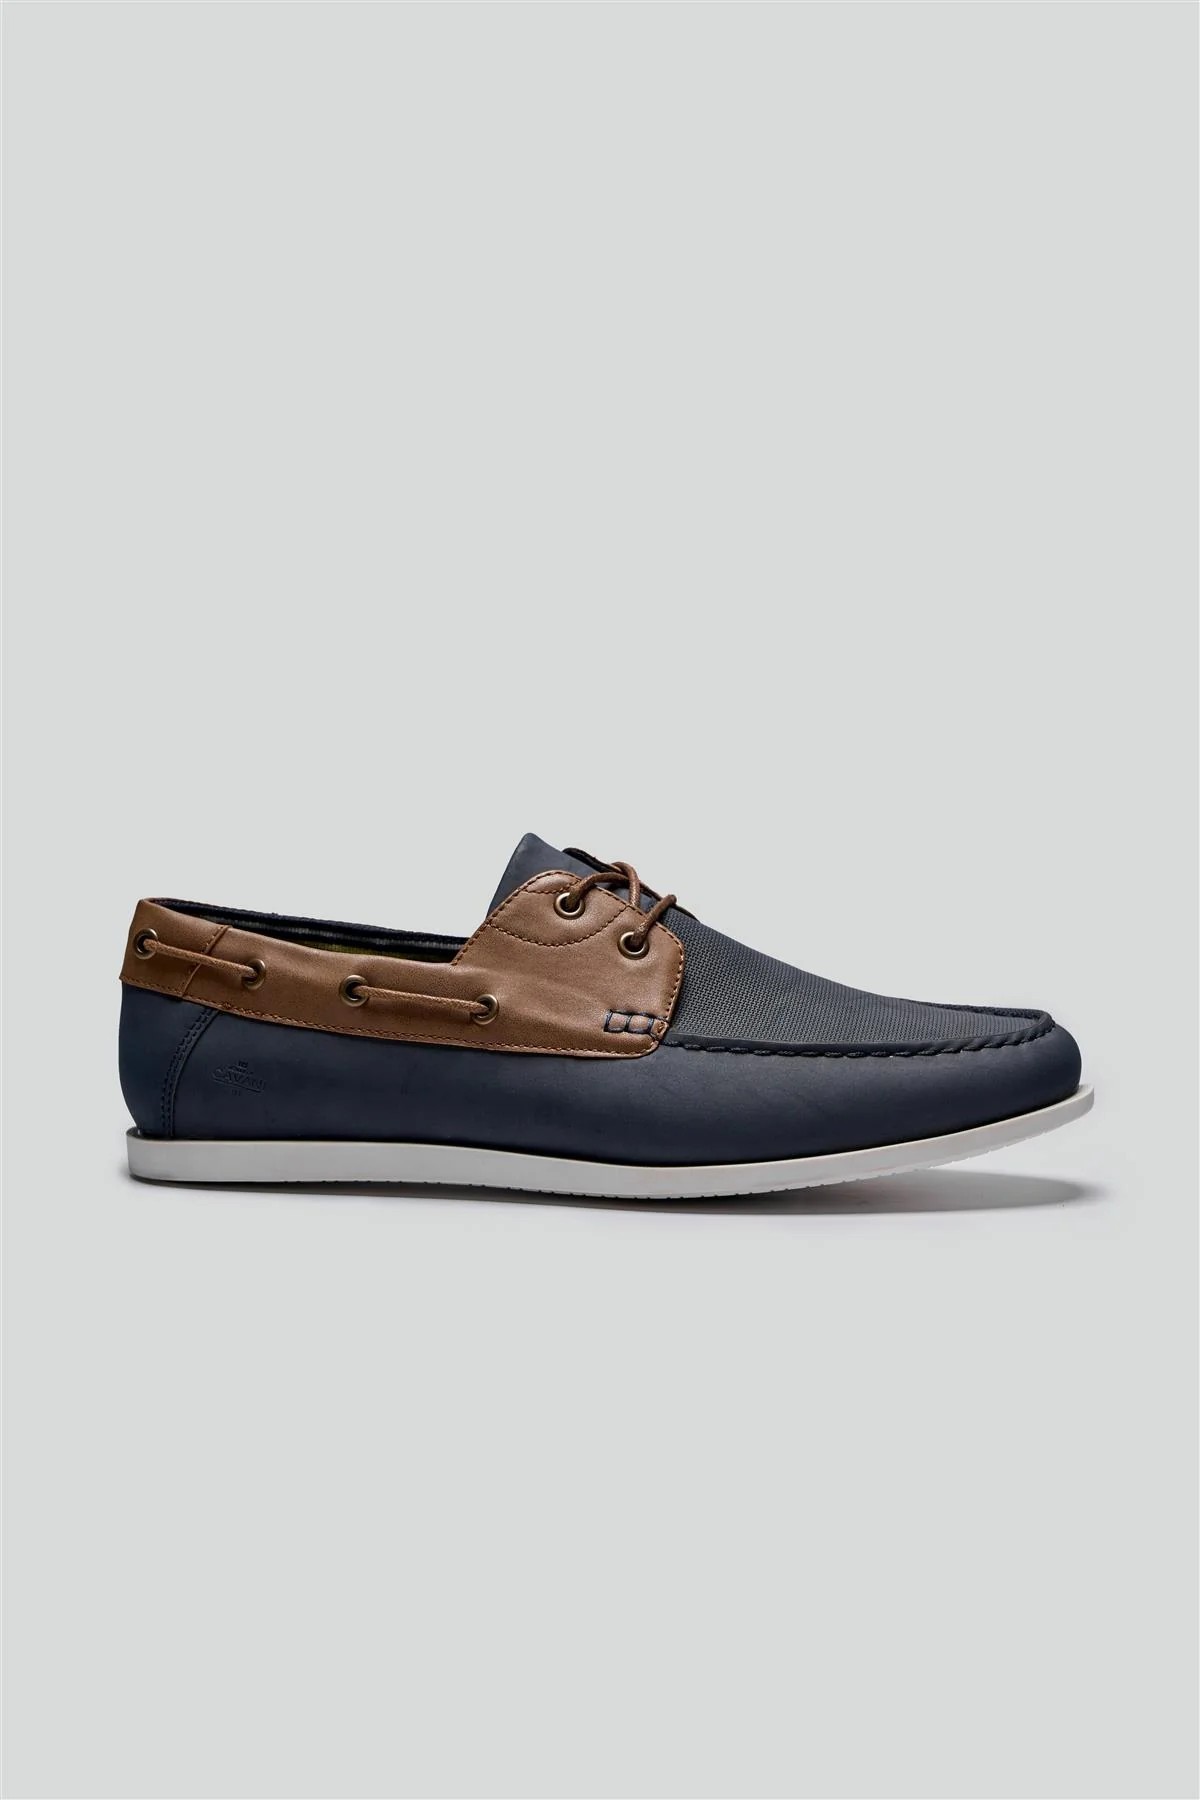 Men’s Leather Boat Shoes with White Sole - ANDROS - Tan Brown - Navy Blue